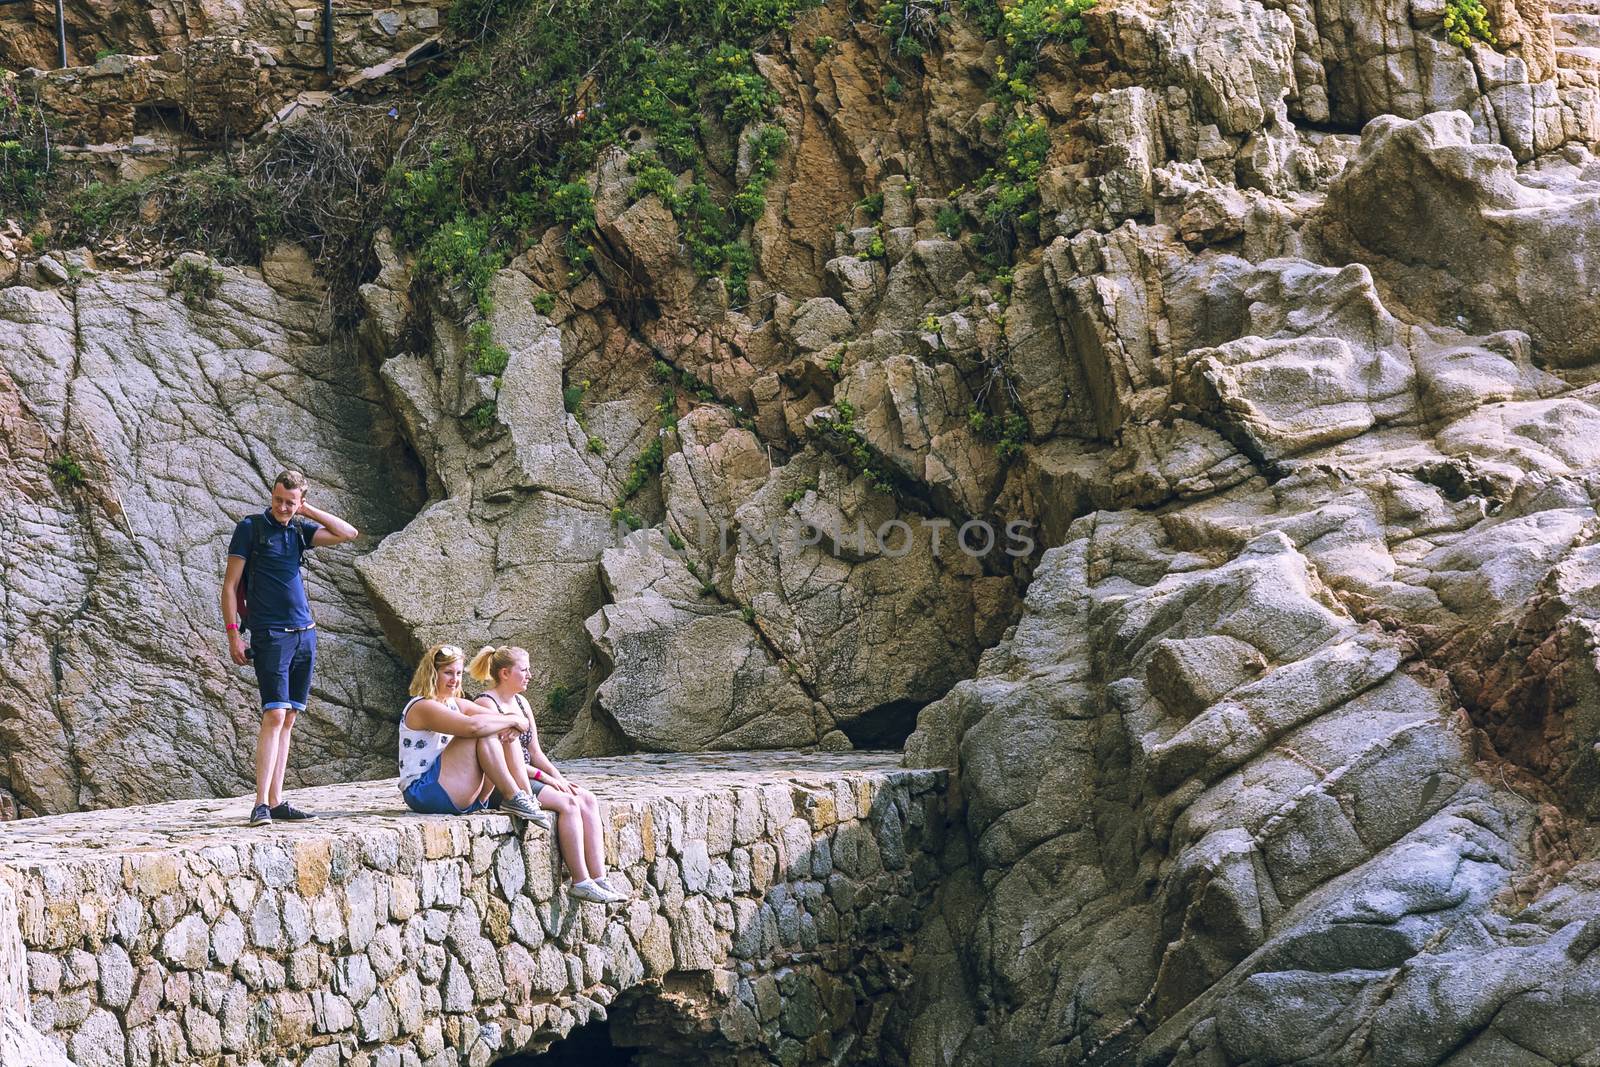 Spain, Lloret de Mar - September 22, 2017: Two girls and a guy on a stone bridge near the mountain, the girls are sitting, the guy is standing.